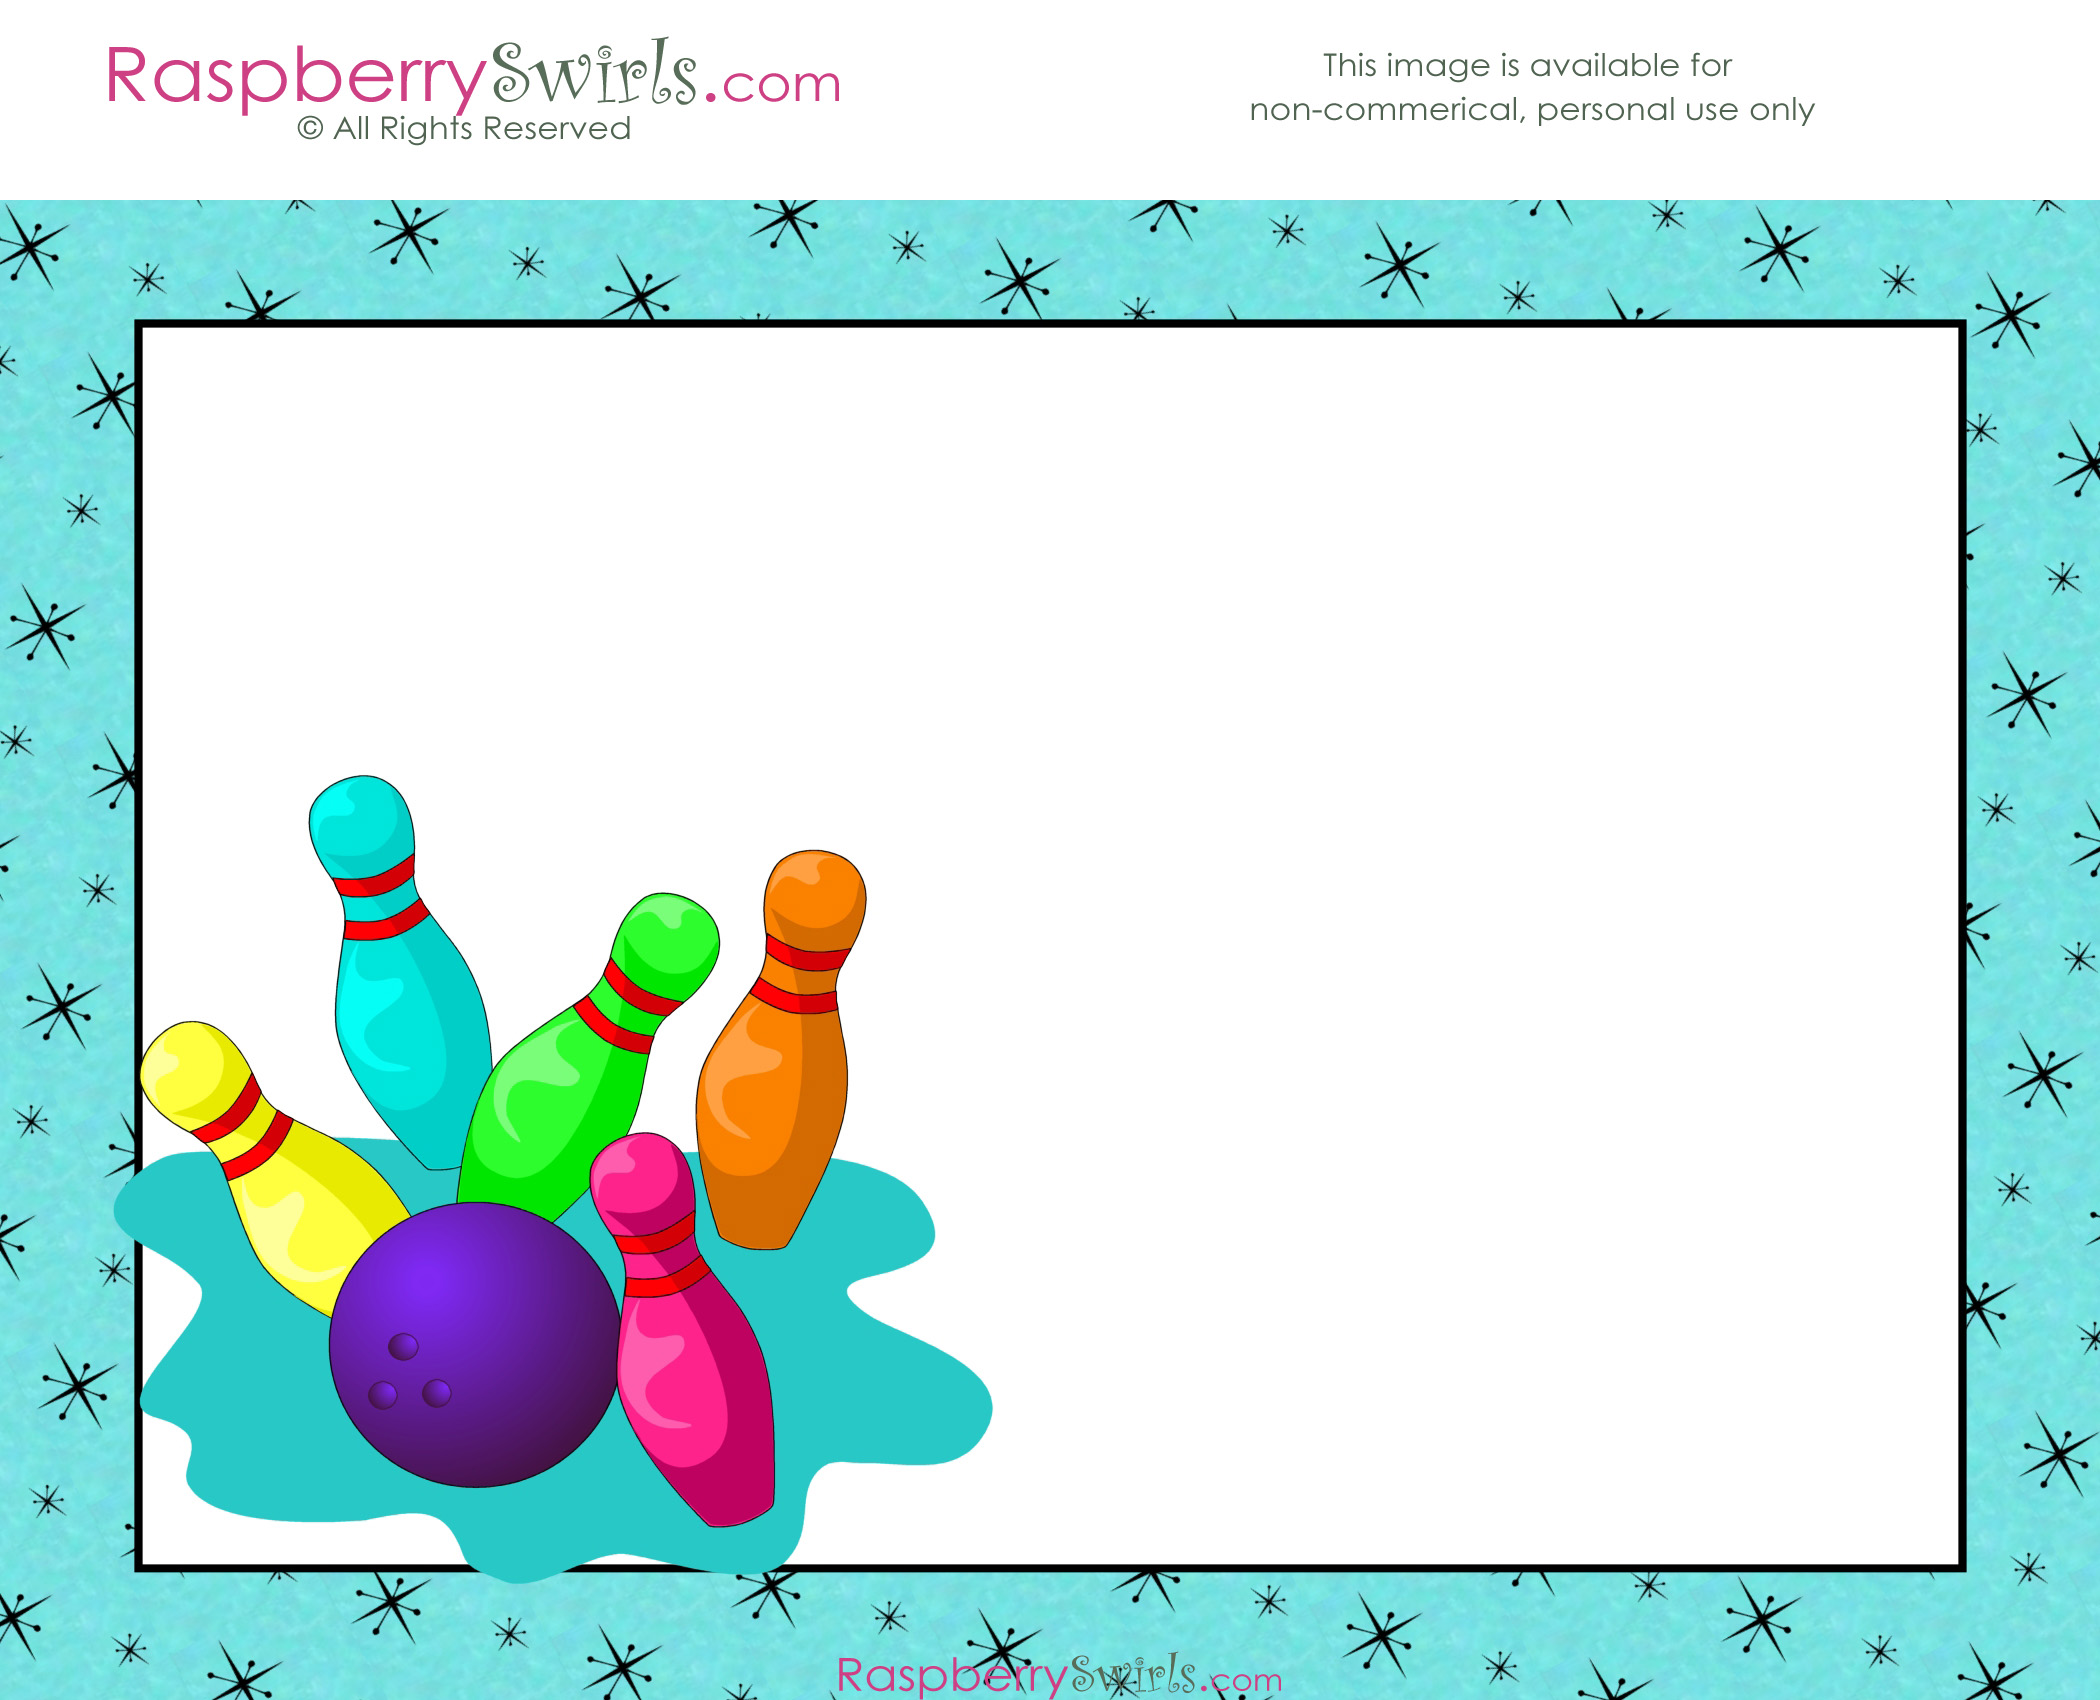 Free Bowling Printable Candy Wrappers, Invitations and more Raspberry Swirls